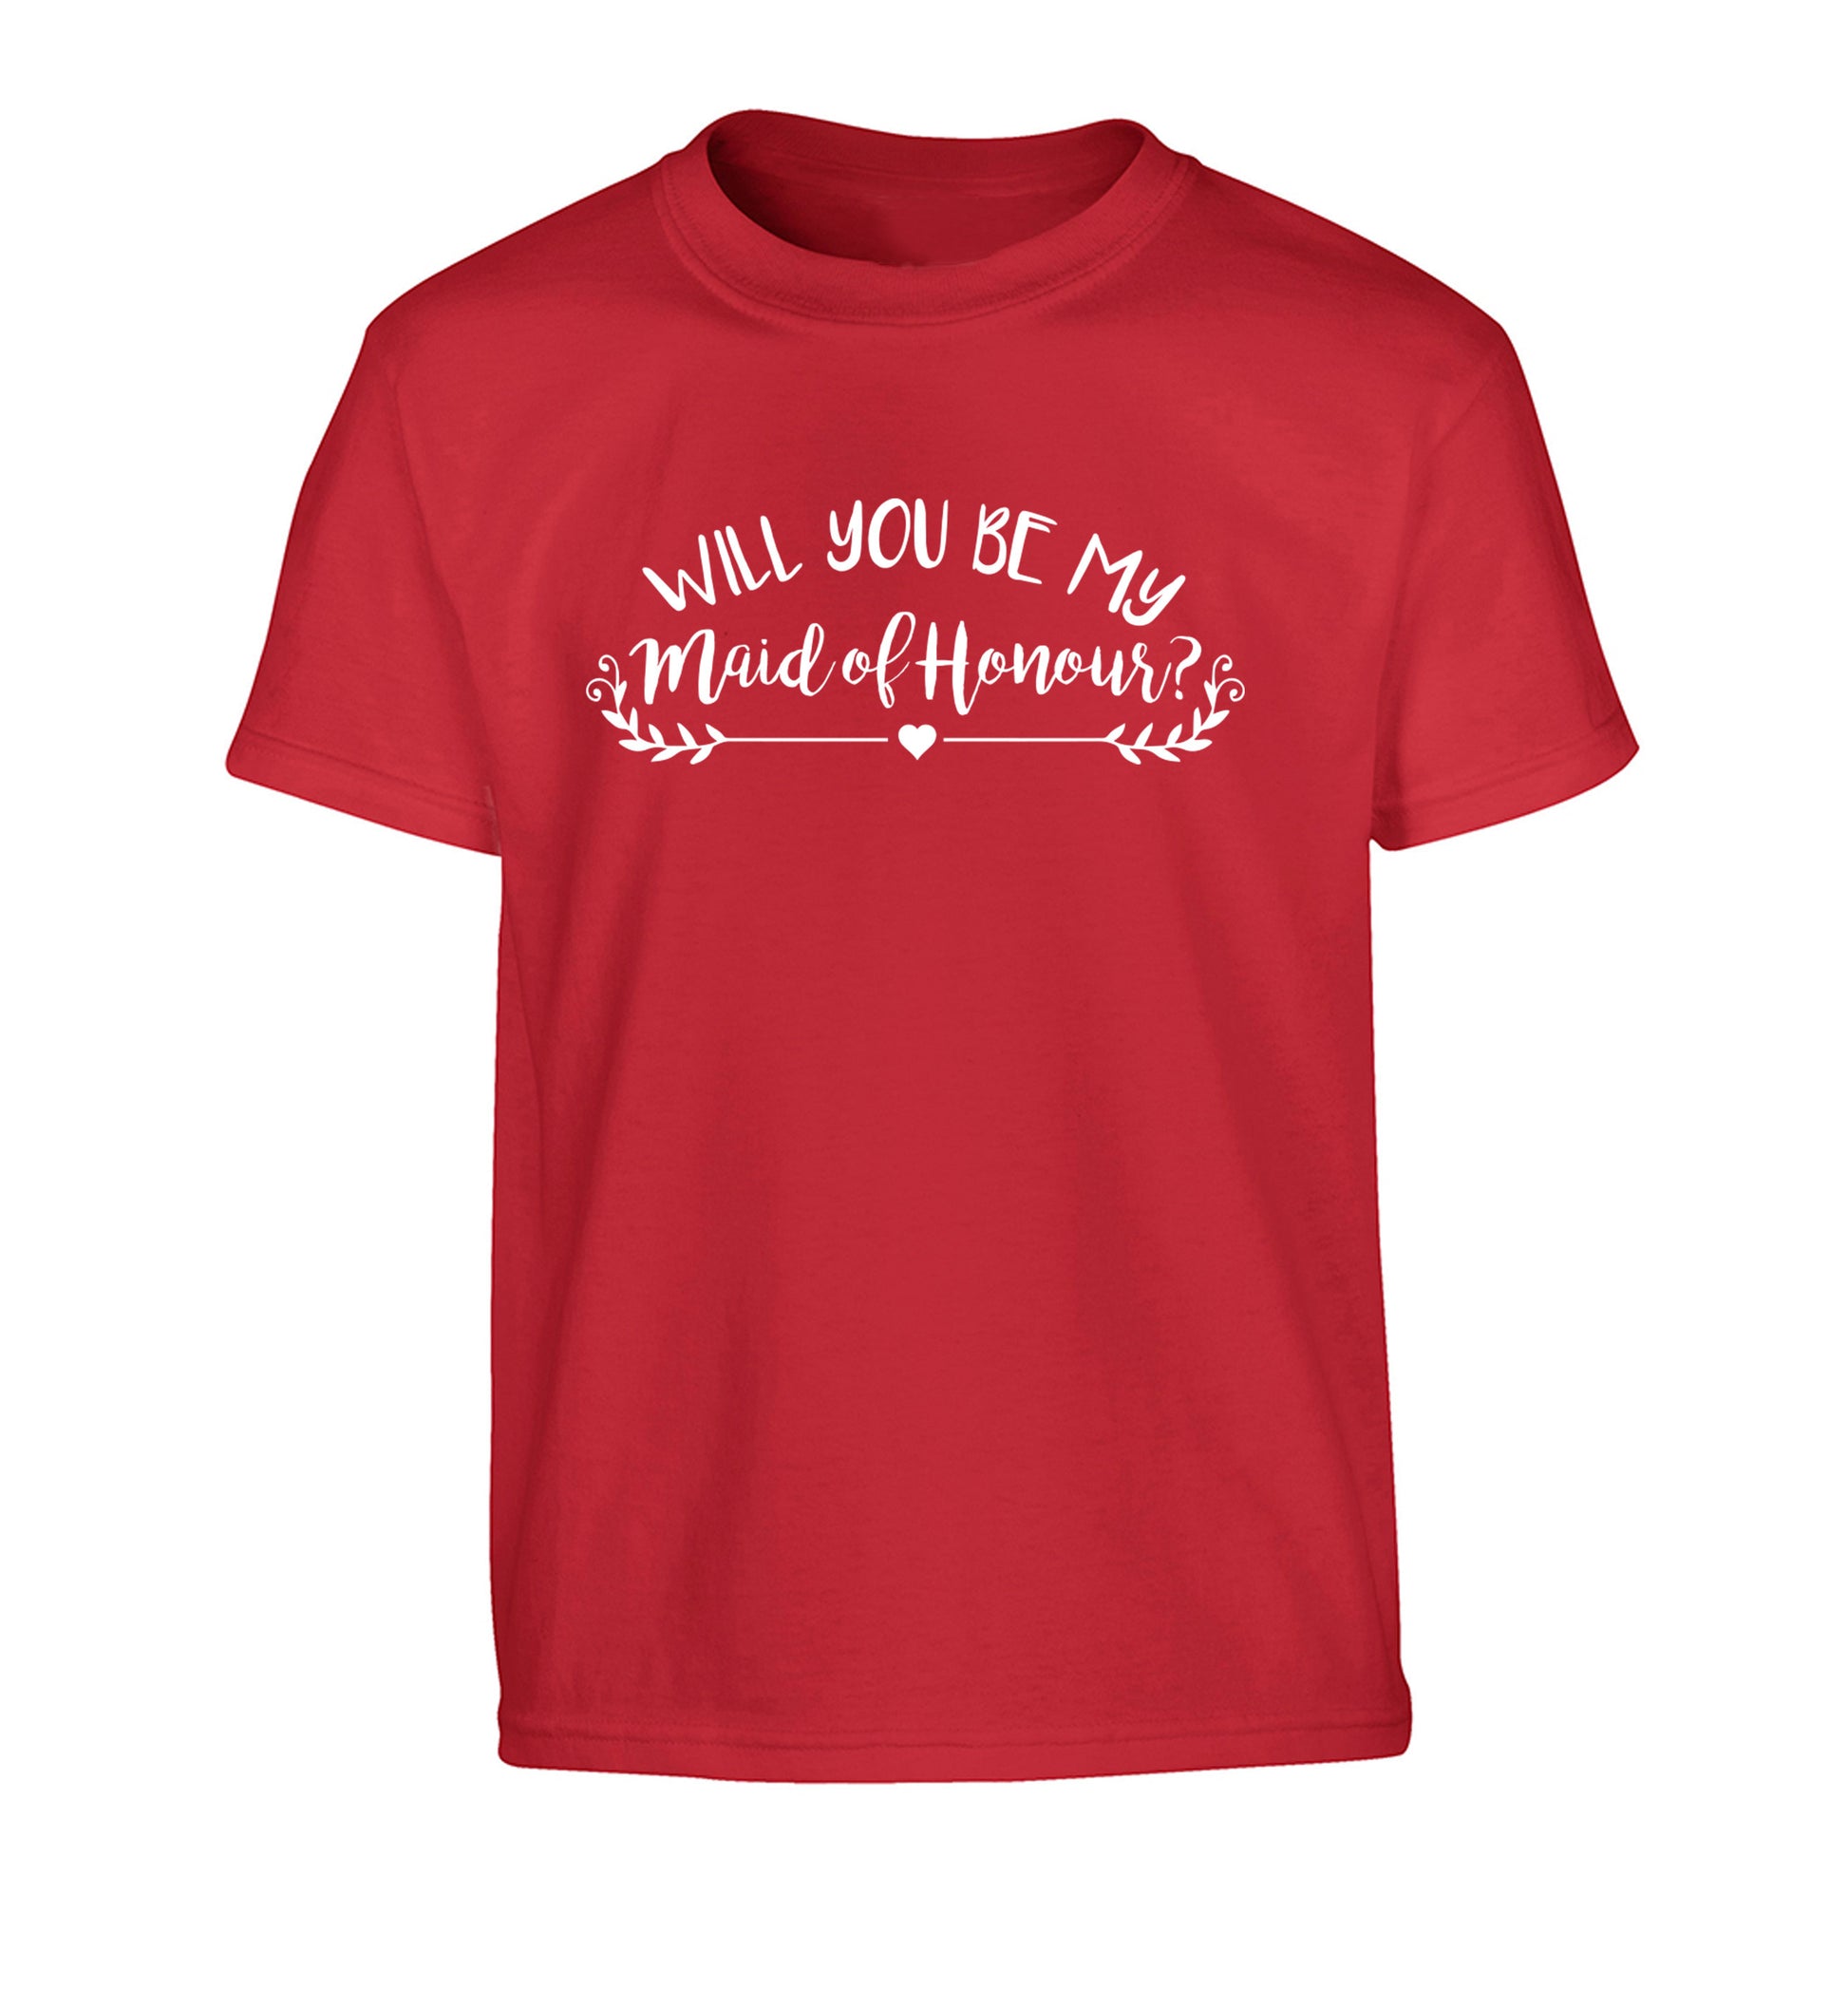 Will you be my maid of honour? Children's red Tshirt 12-14 Years